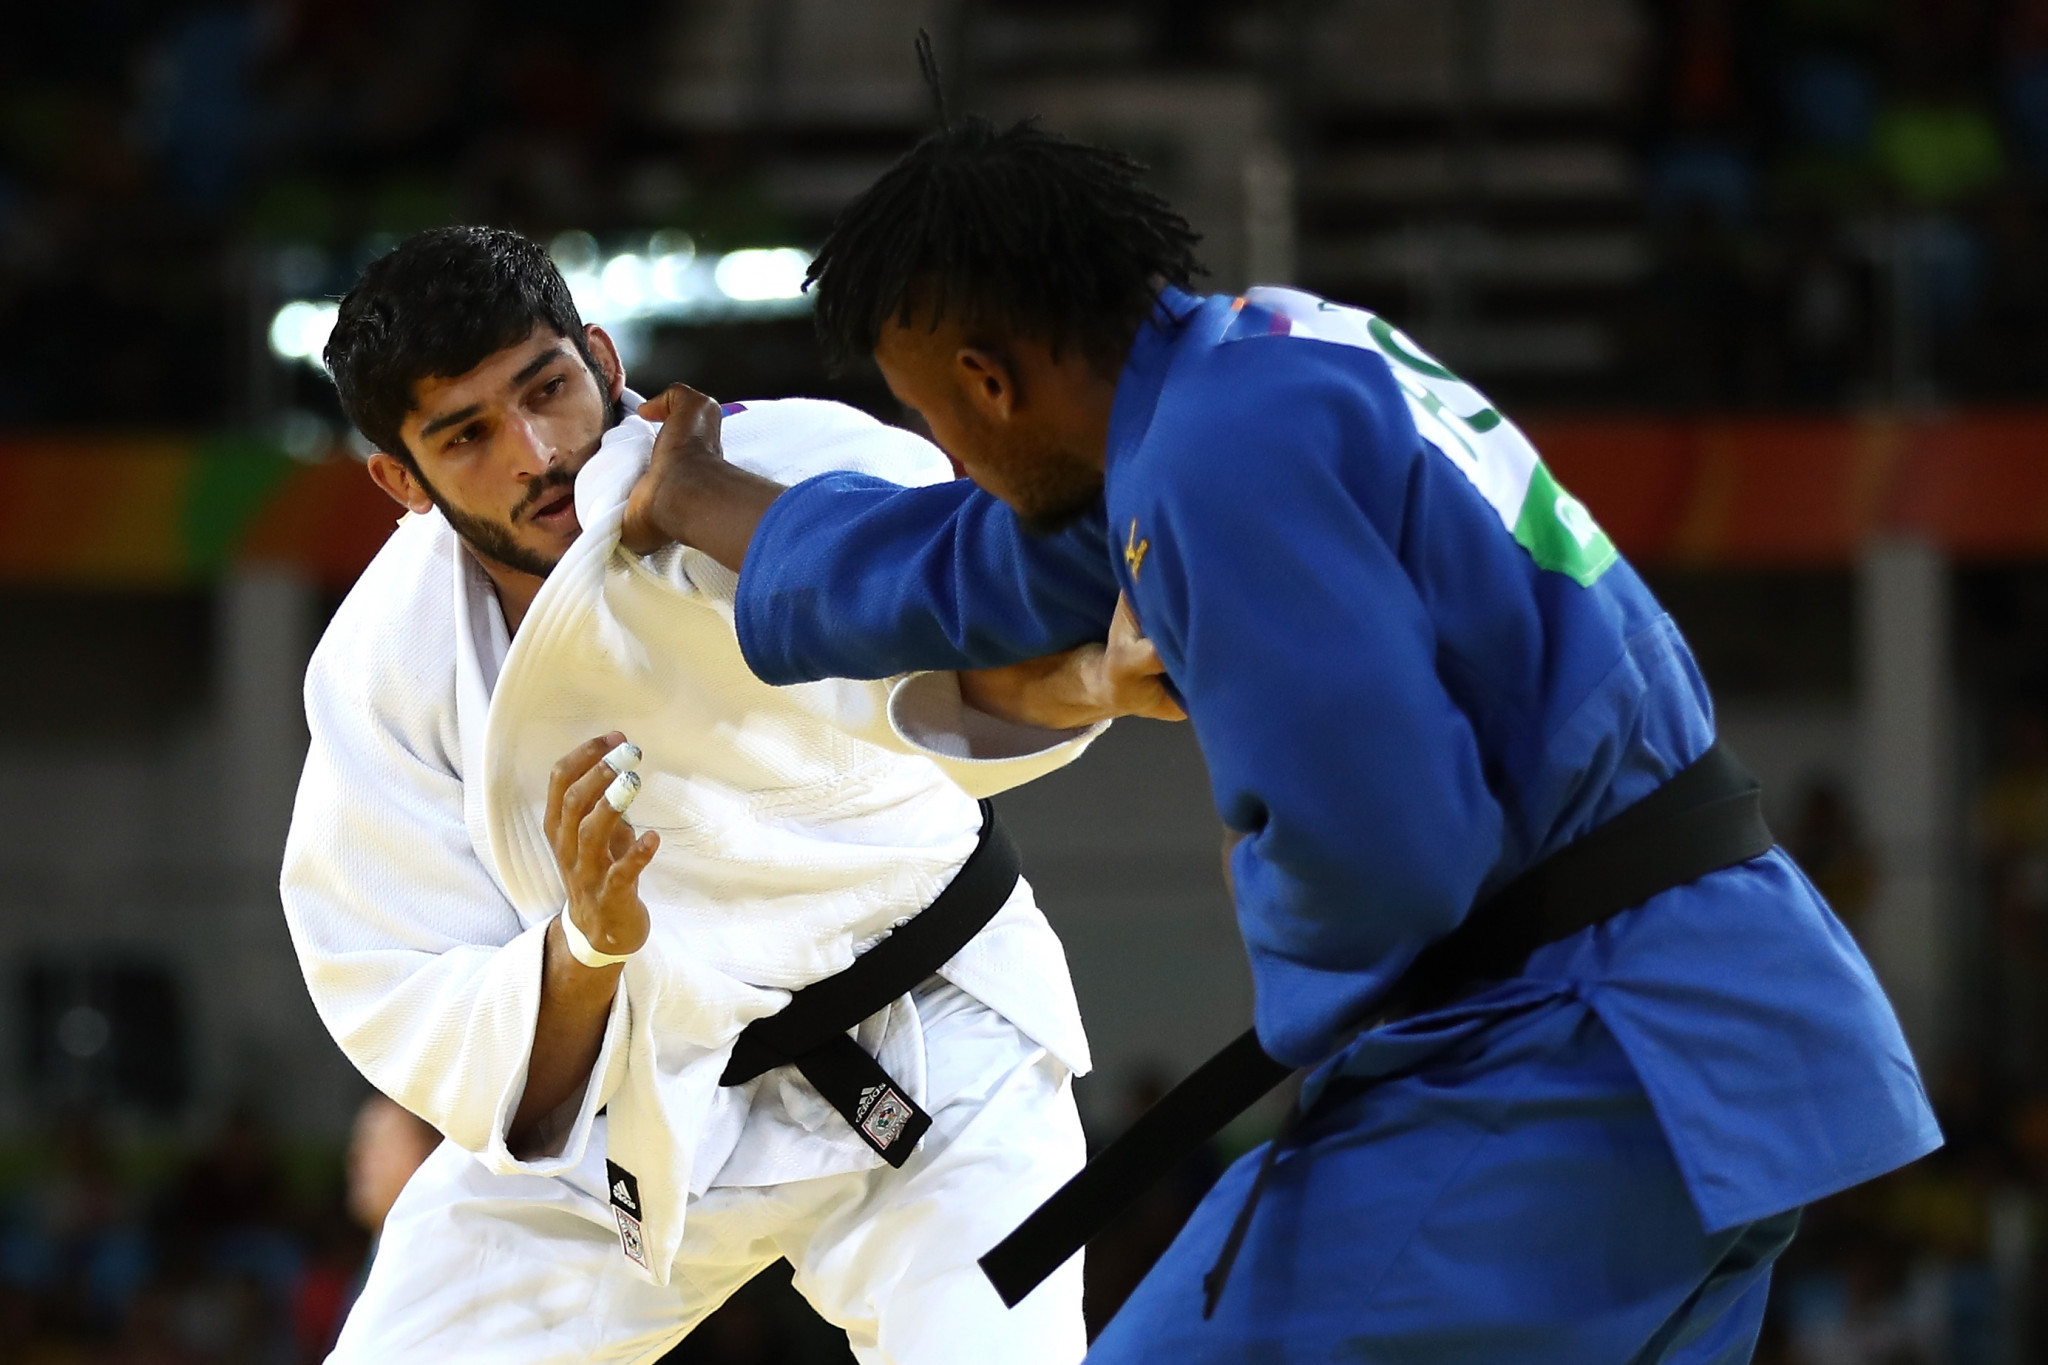 Avtar Singh is hoping to qualify for Tokyo 2020 with a strong showing at the Asia-Oceania Judo Championships ©Getty Images